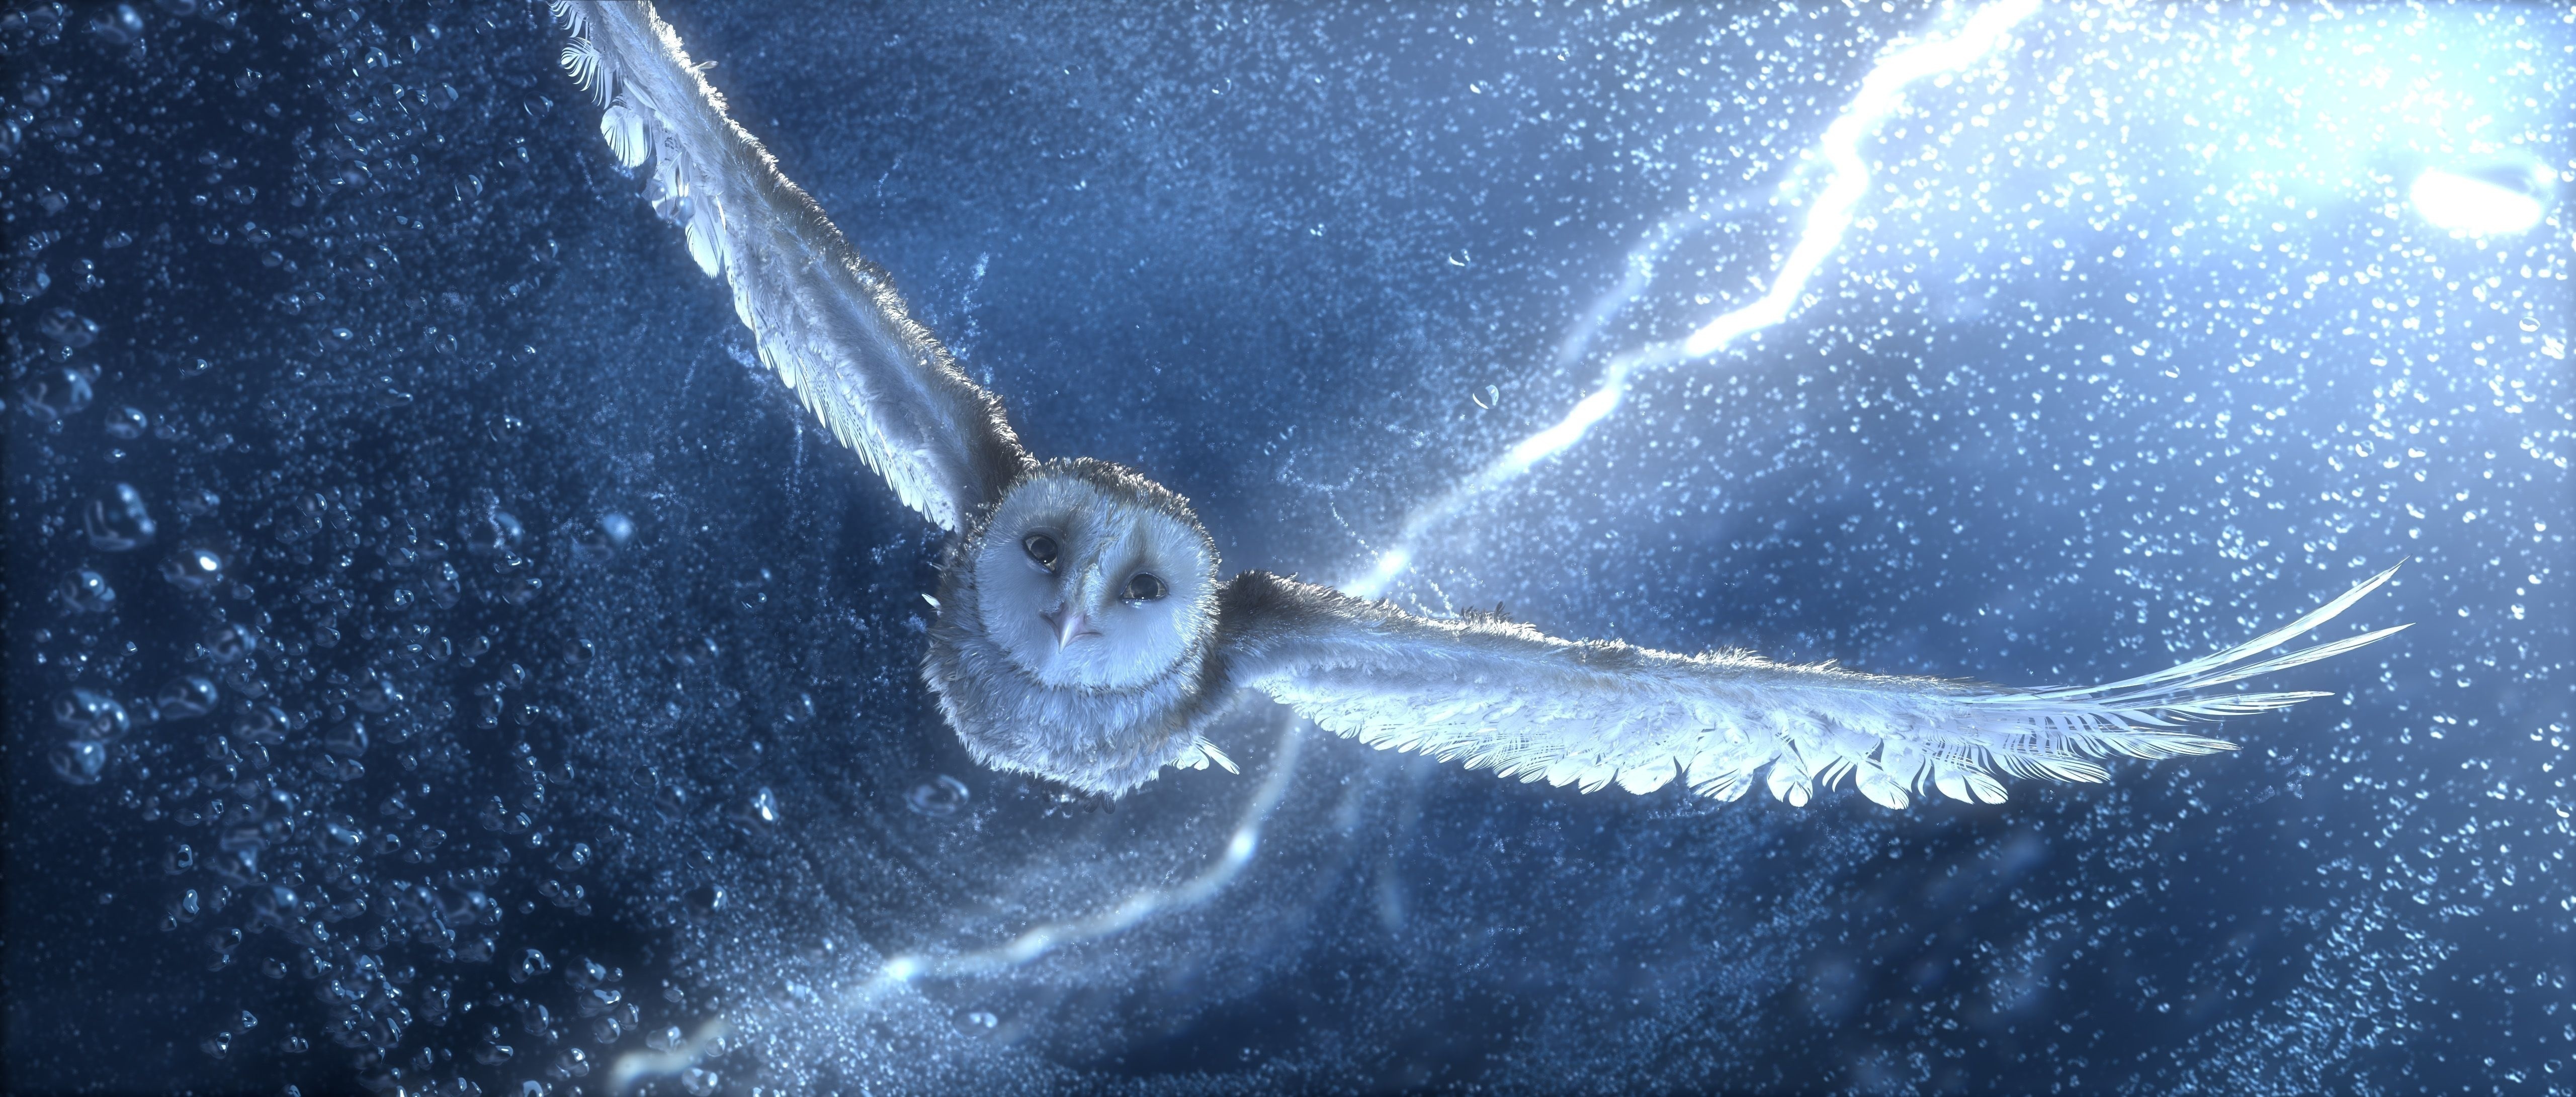 movie, legend of the guardians: the owls of ga'hoole, bird, cgi, owl, snow, wings